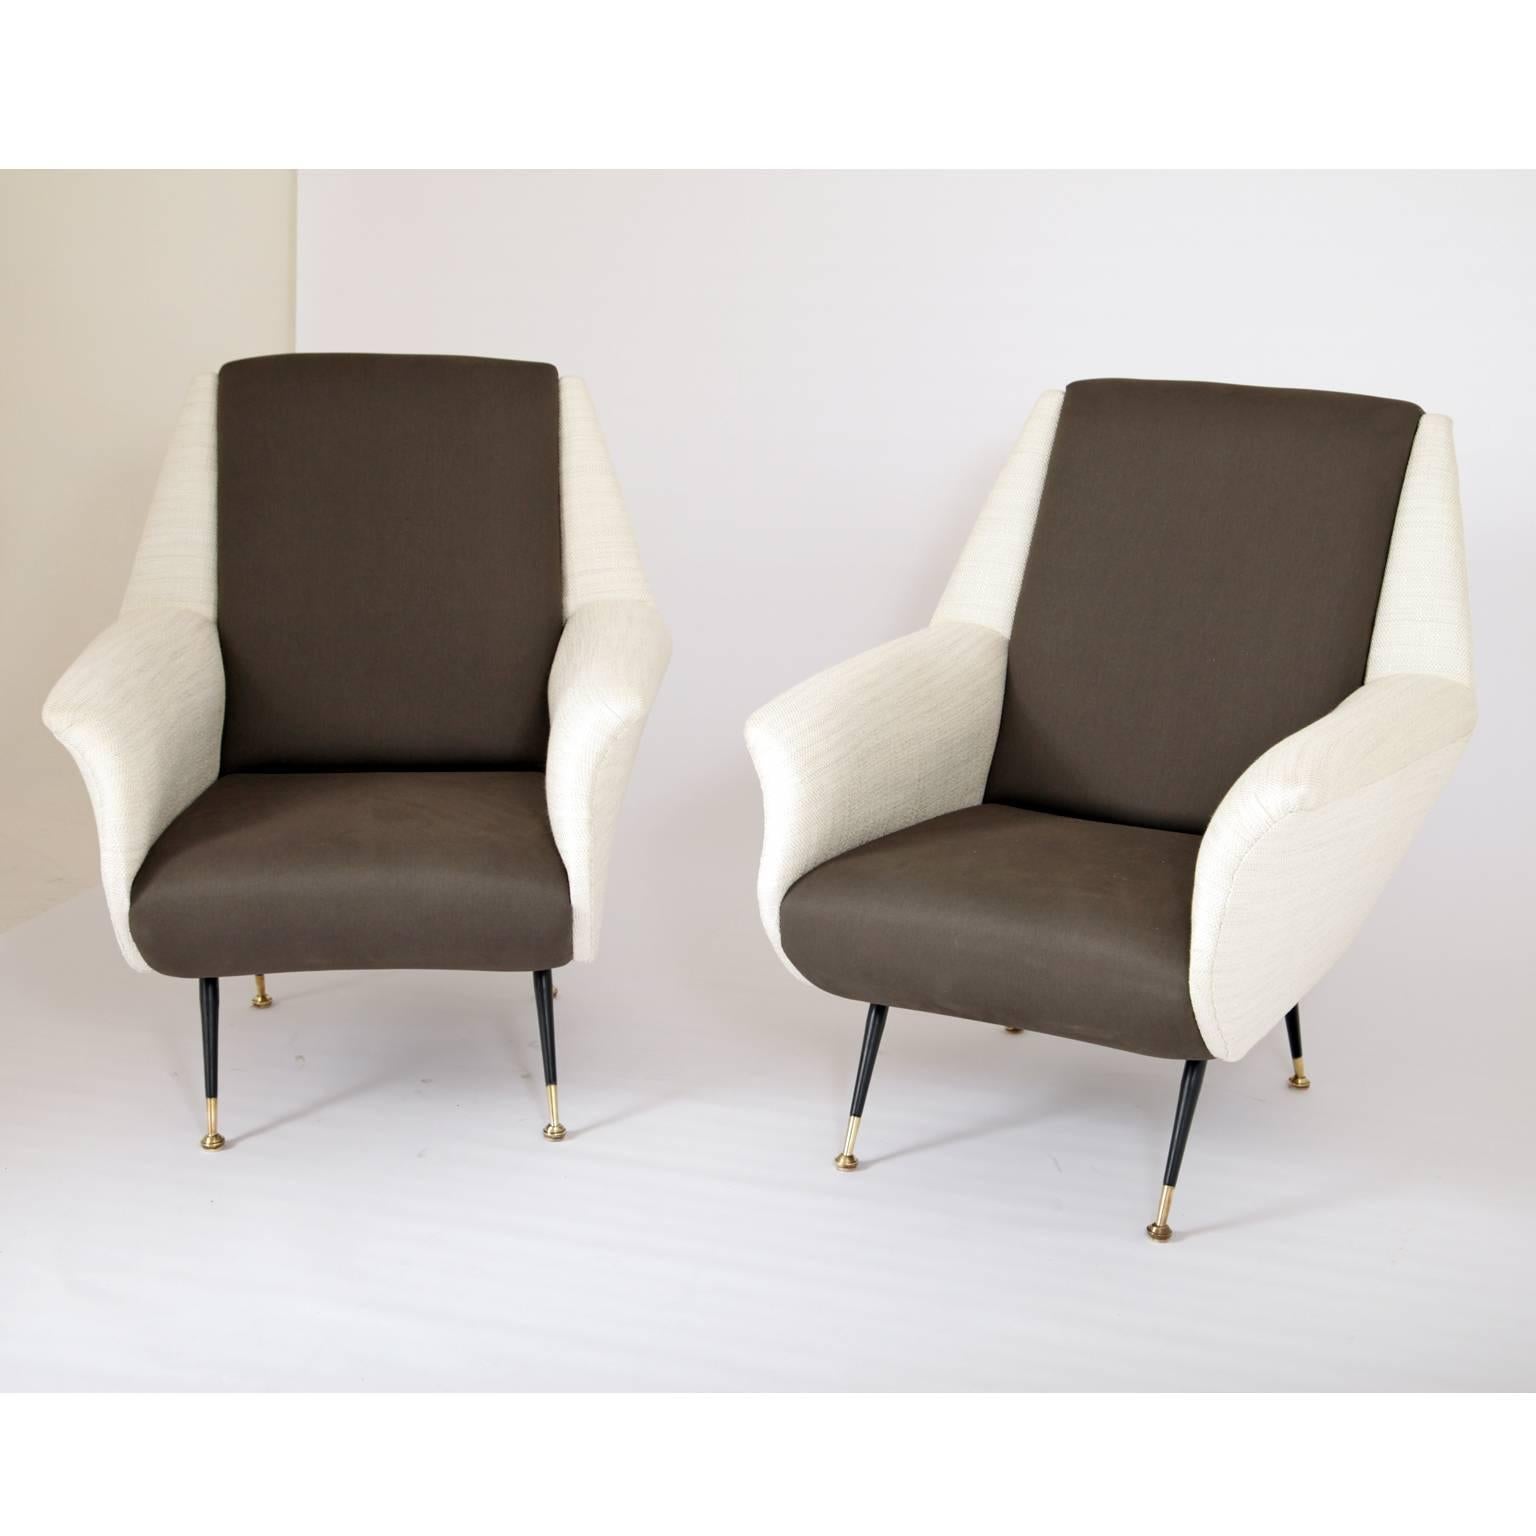 Pair of Italian lounge chairs on thin iron feet. Backrest and seat are dark grey, the sides are white.